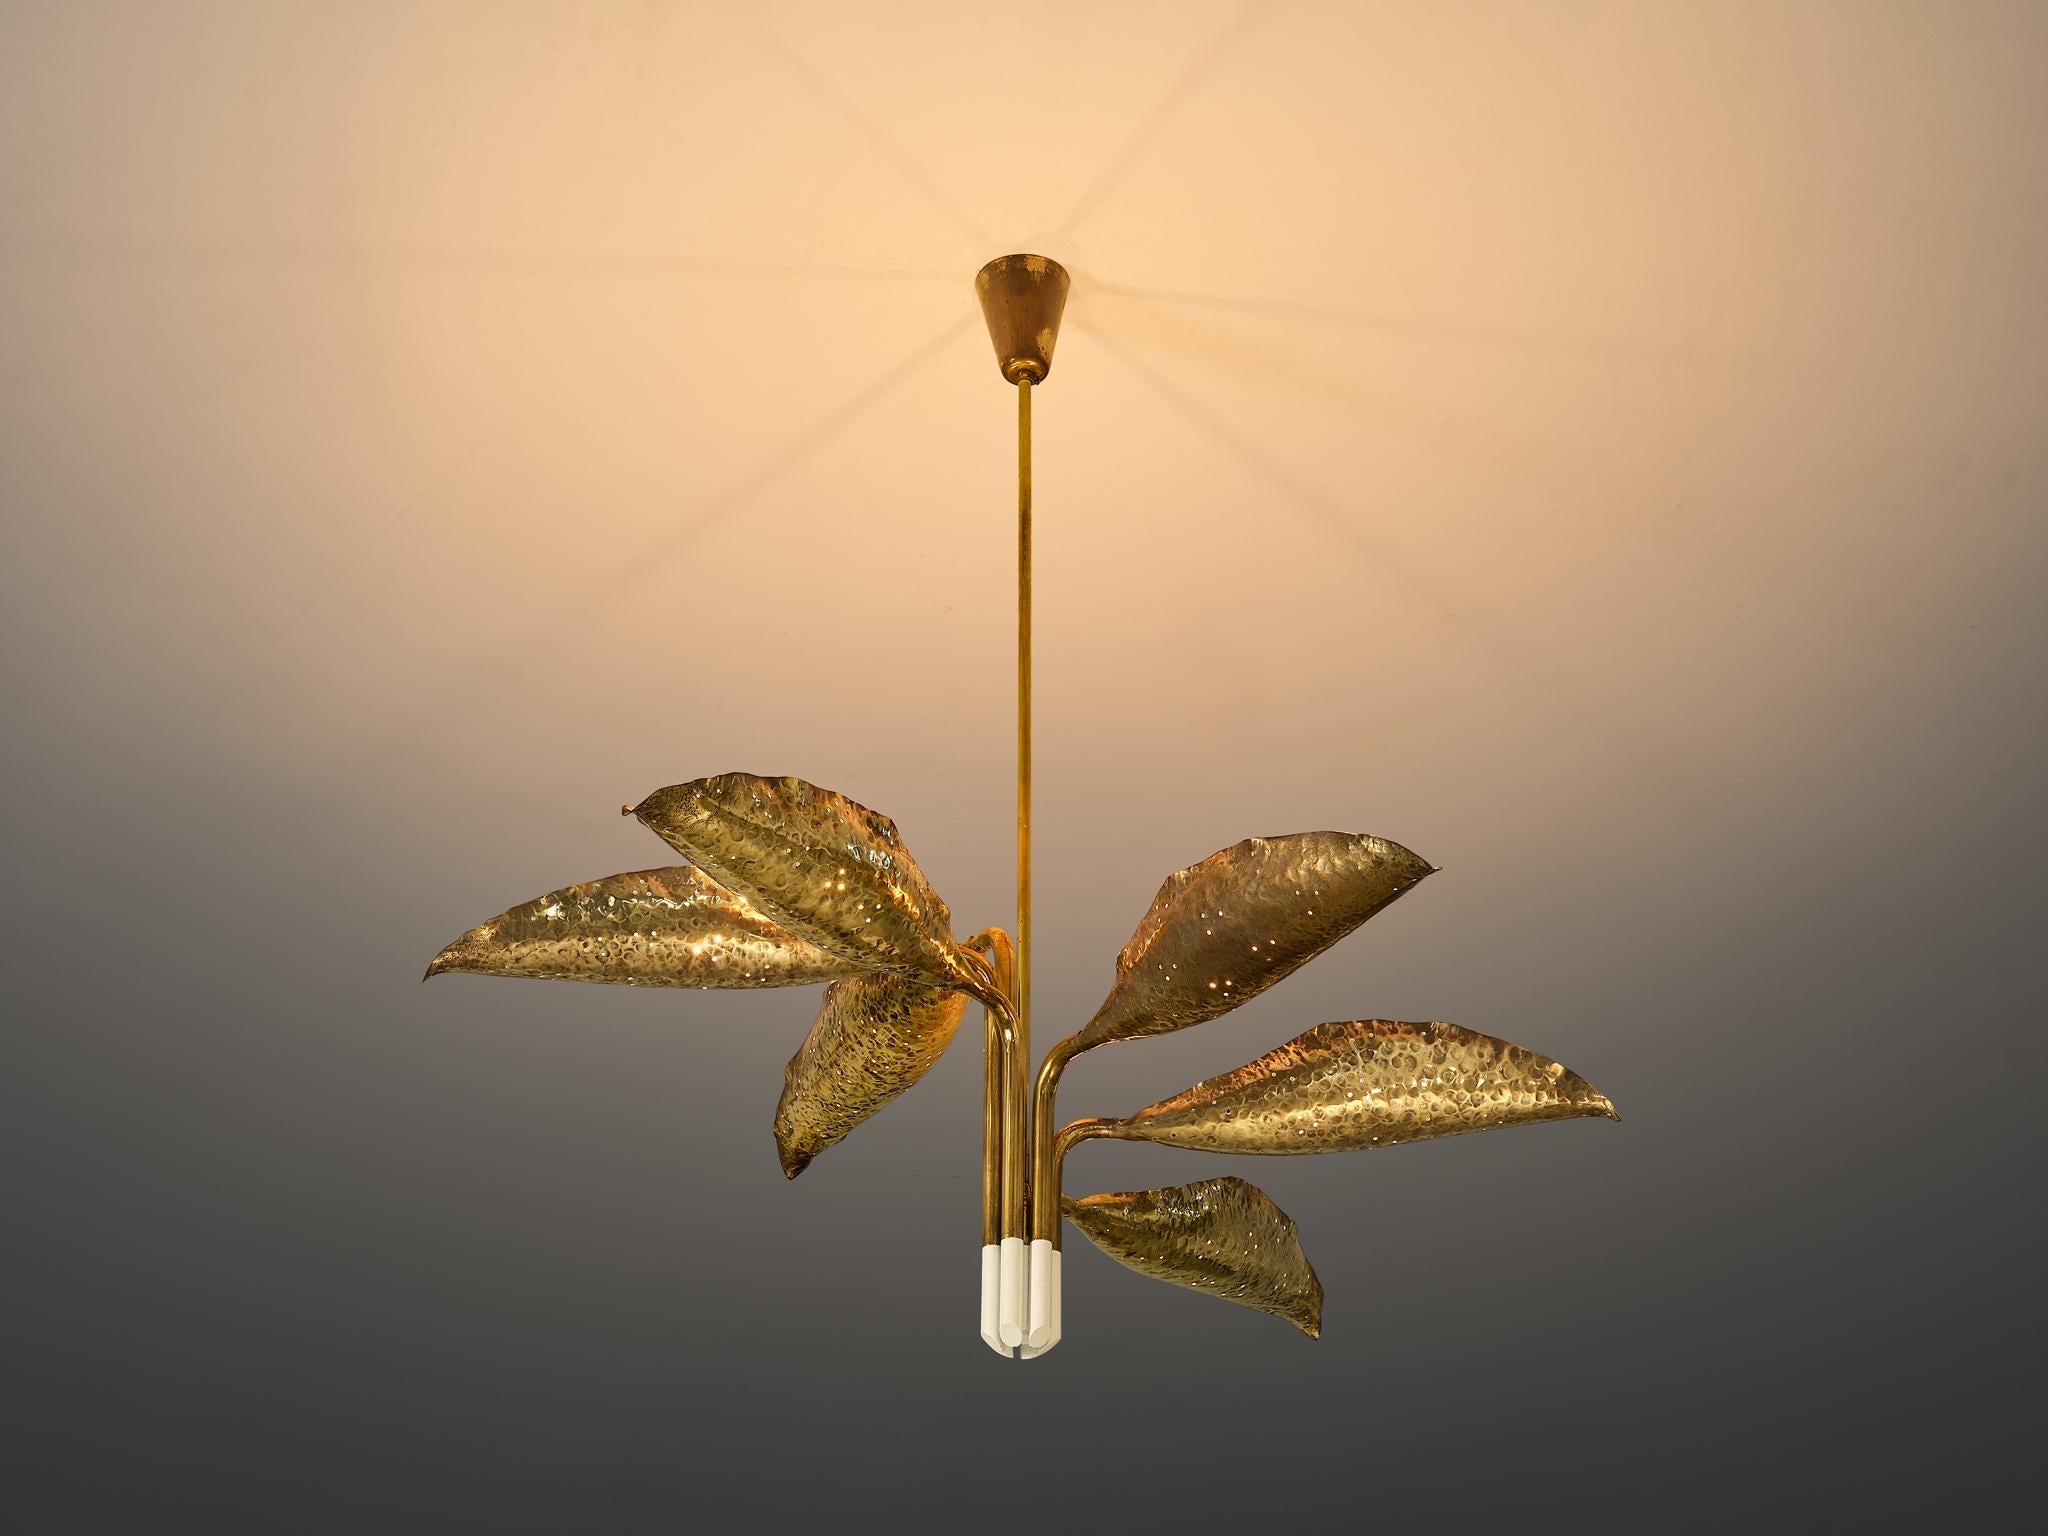 Angelo Lelii for Arredoluce, chandelier, model 12369, brass, Italy, circa 1951

Angelo Lelii, the creative mind behind Arredoluce, crafted this chandelier with an organic, flowing shape. He is considered to be an important figure in the history of